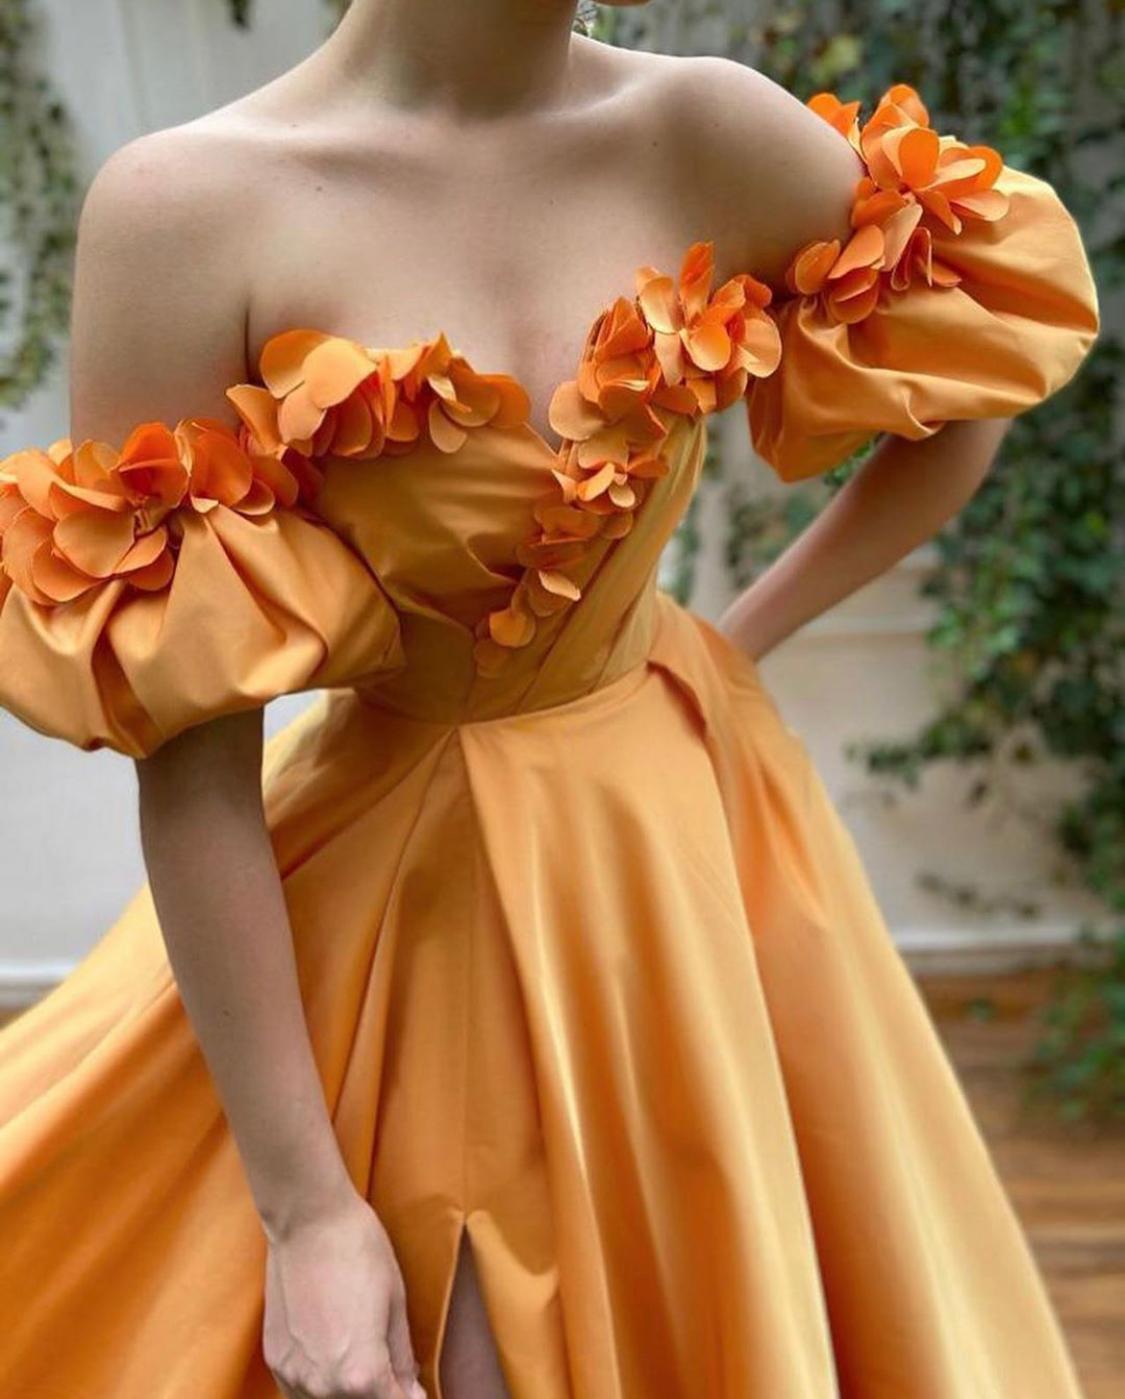 Orange A-Line dress with off the shoulder sleeves and embroidery